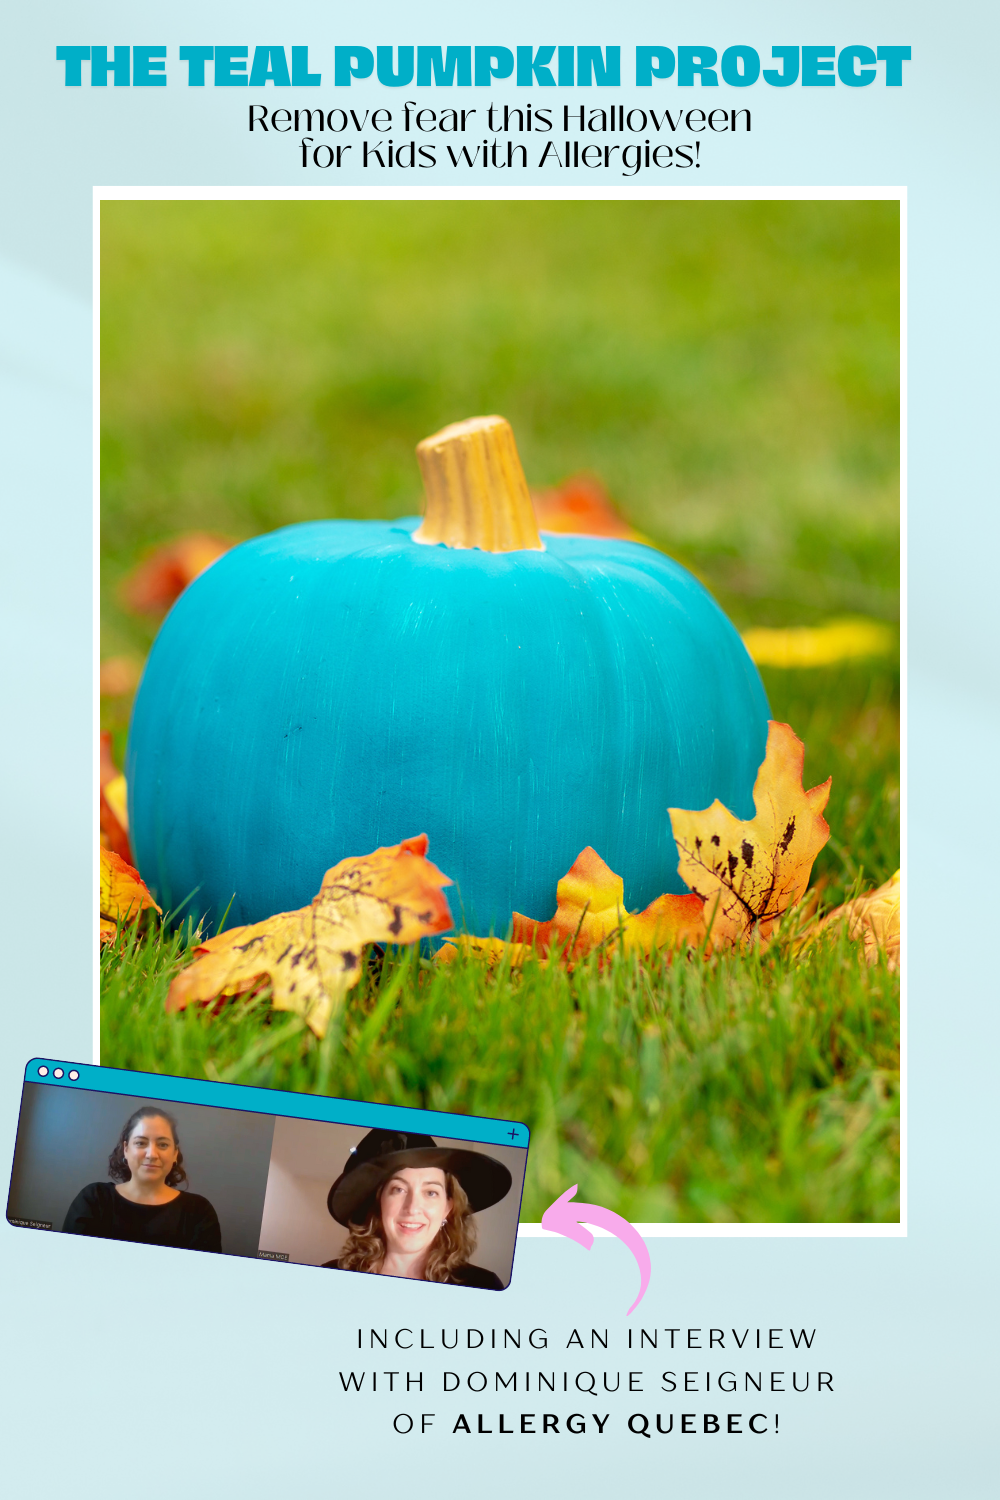 Head over to my latest blog post as I discuss allergies and Halloween with Dominique Seigneur of Allergy Quebec and how YOU can take part in the Teal Pumpkin Project!